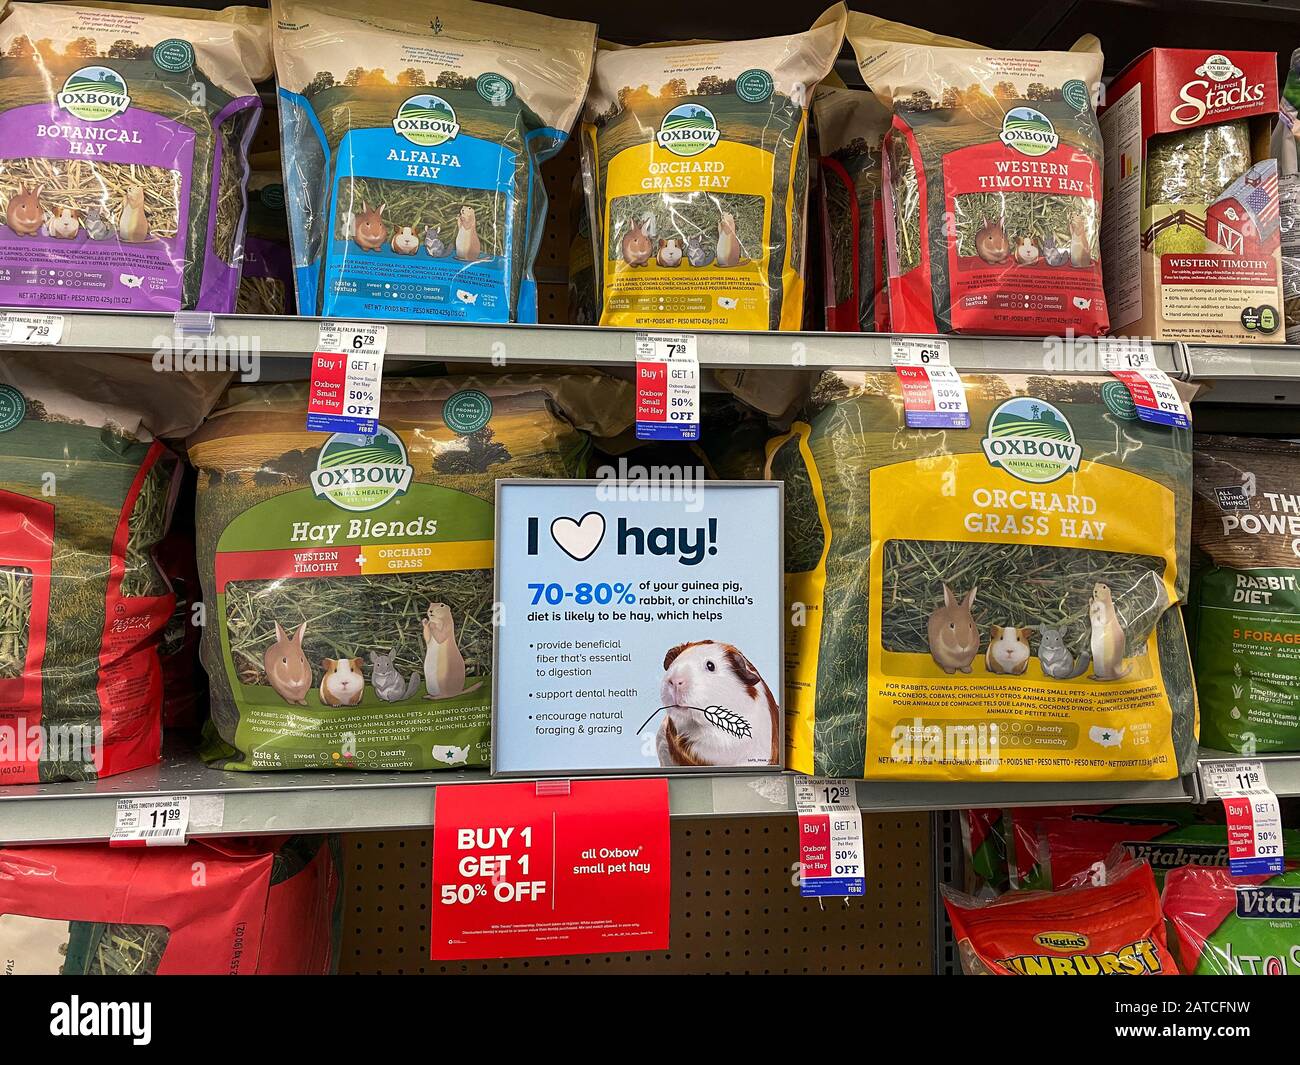 Orlando, FL/USA-1/29/20: A display of hay which is food for rabbits, gunea pigs or chinchillas at a Petsmart Superstore ready for pet owners to purcha Stock Photo